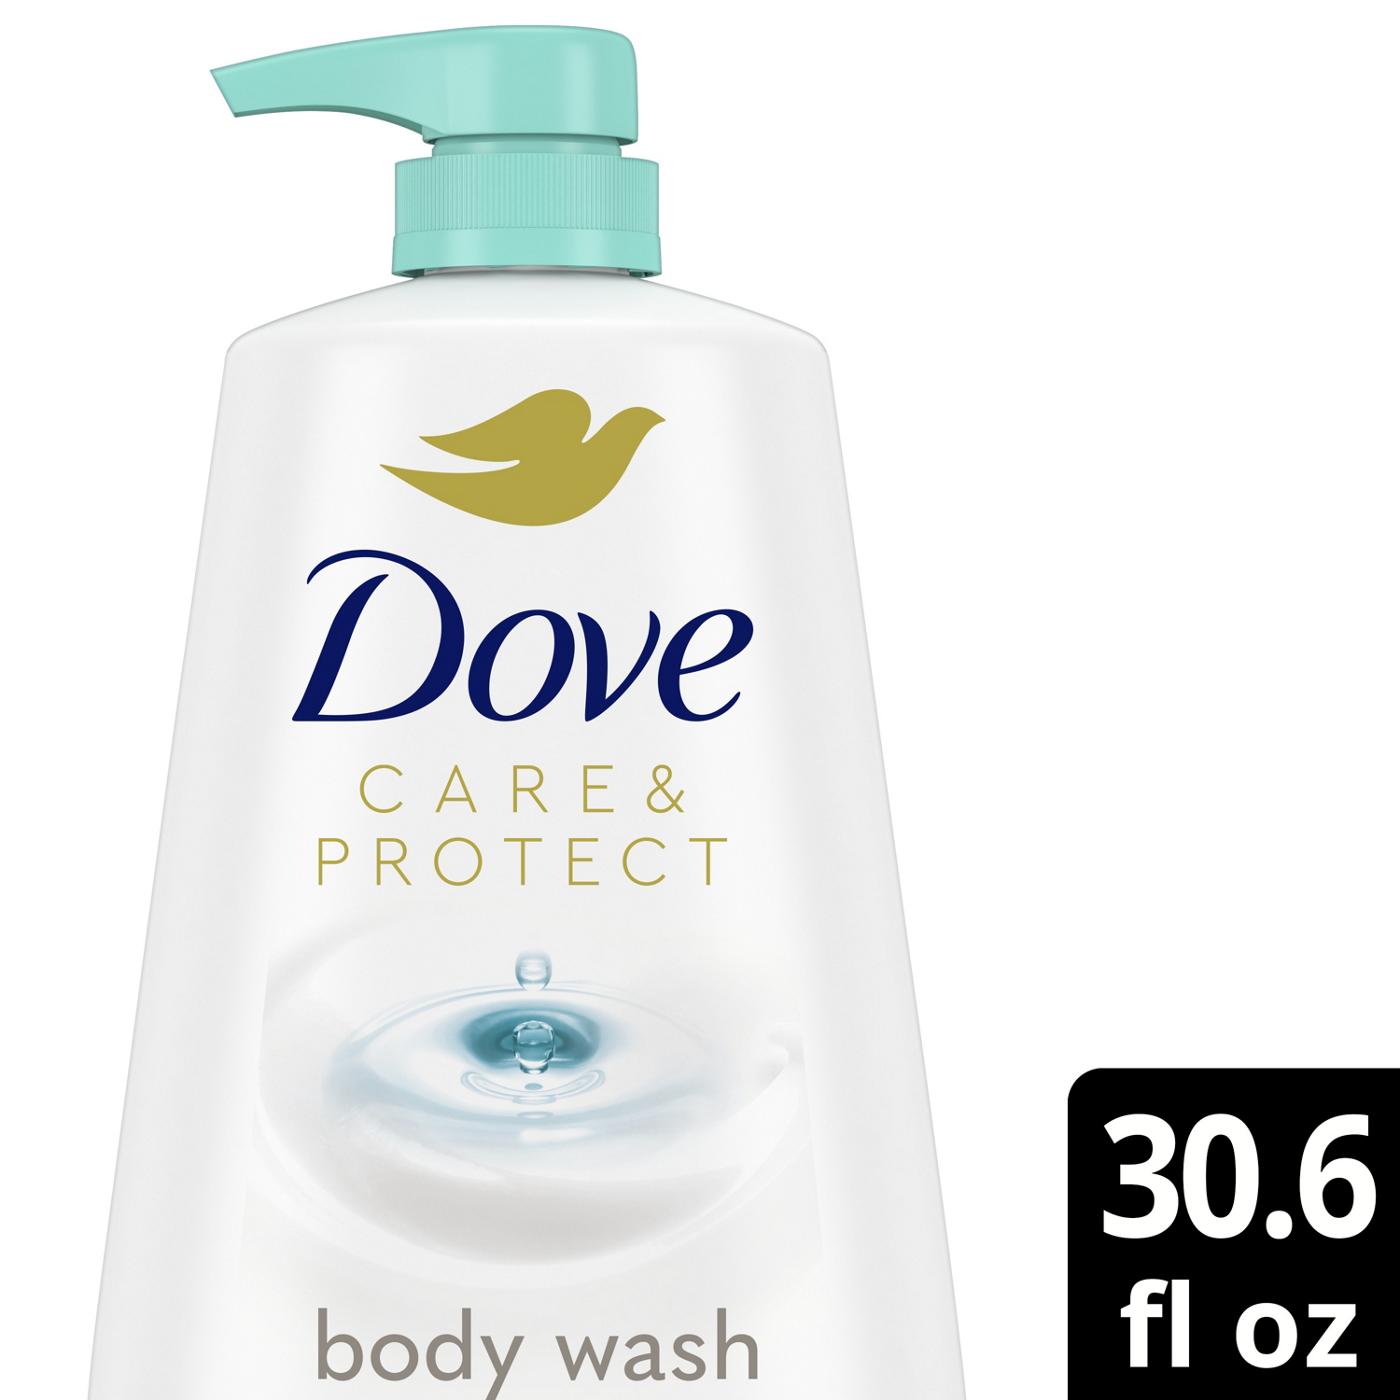 Dove Care & Protect Antibacterial Body Wash; image 7 of 8